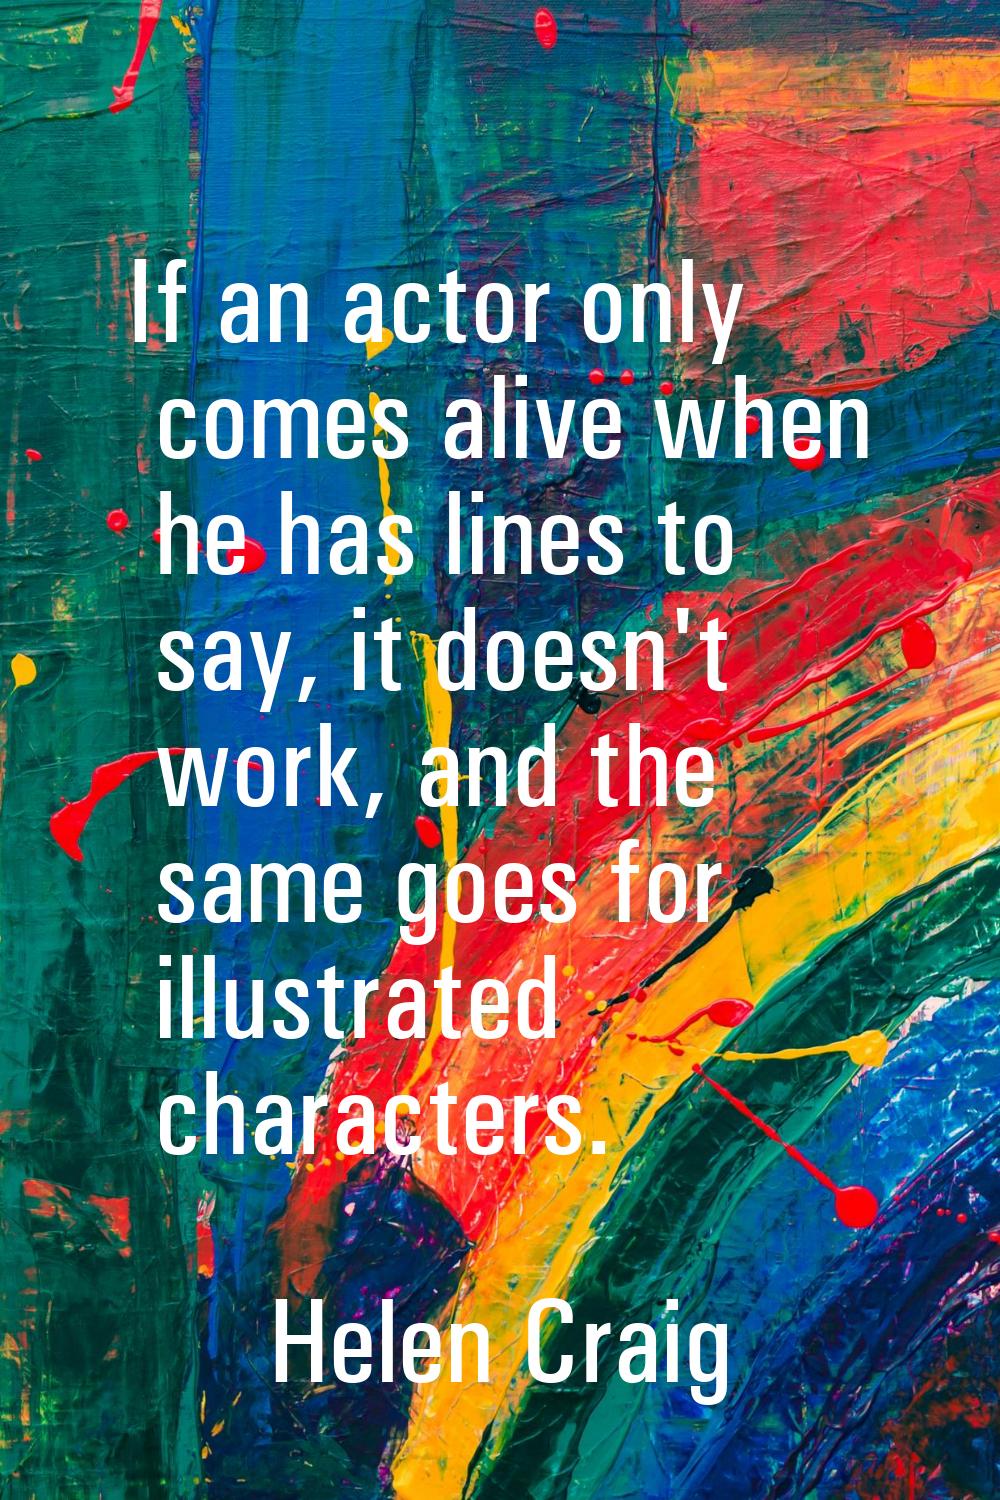 If an actor only comes alive when he has lines to say, it doesn't work, and the same goes for illus